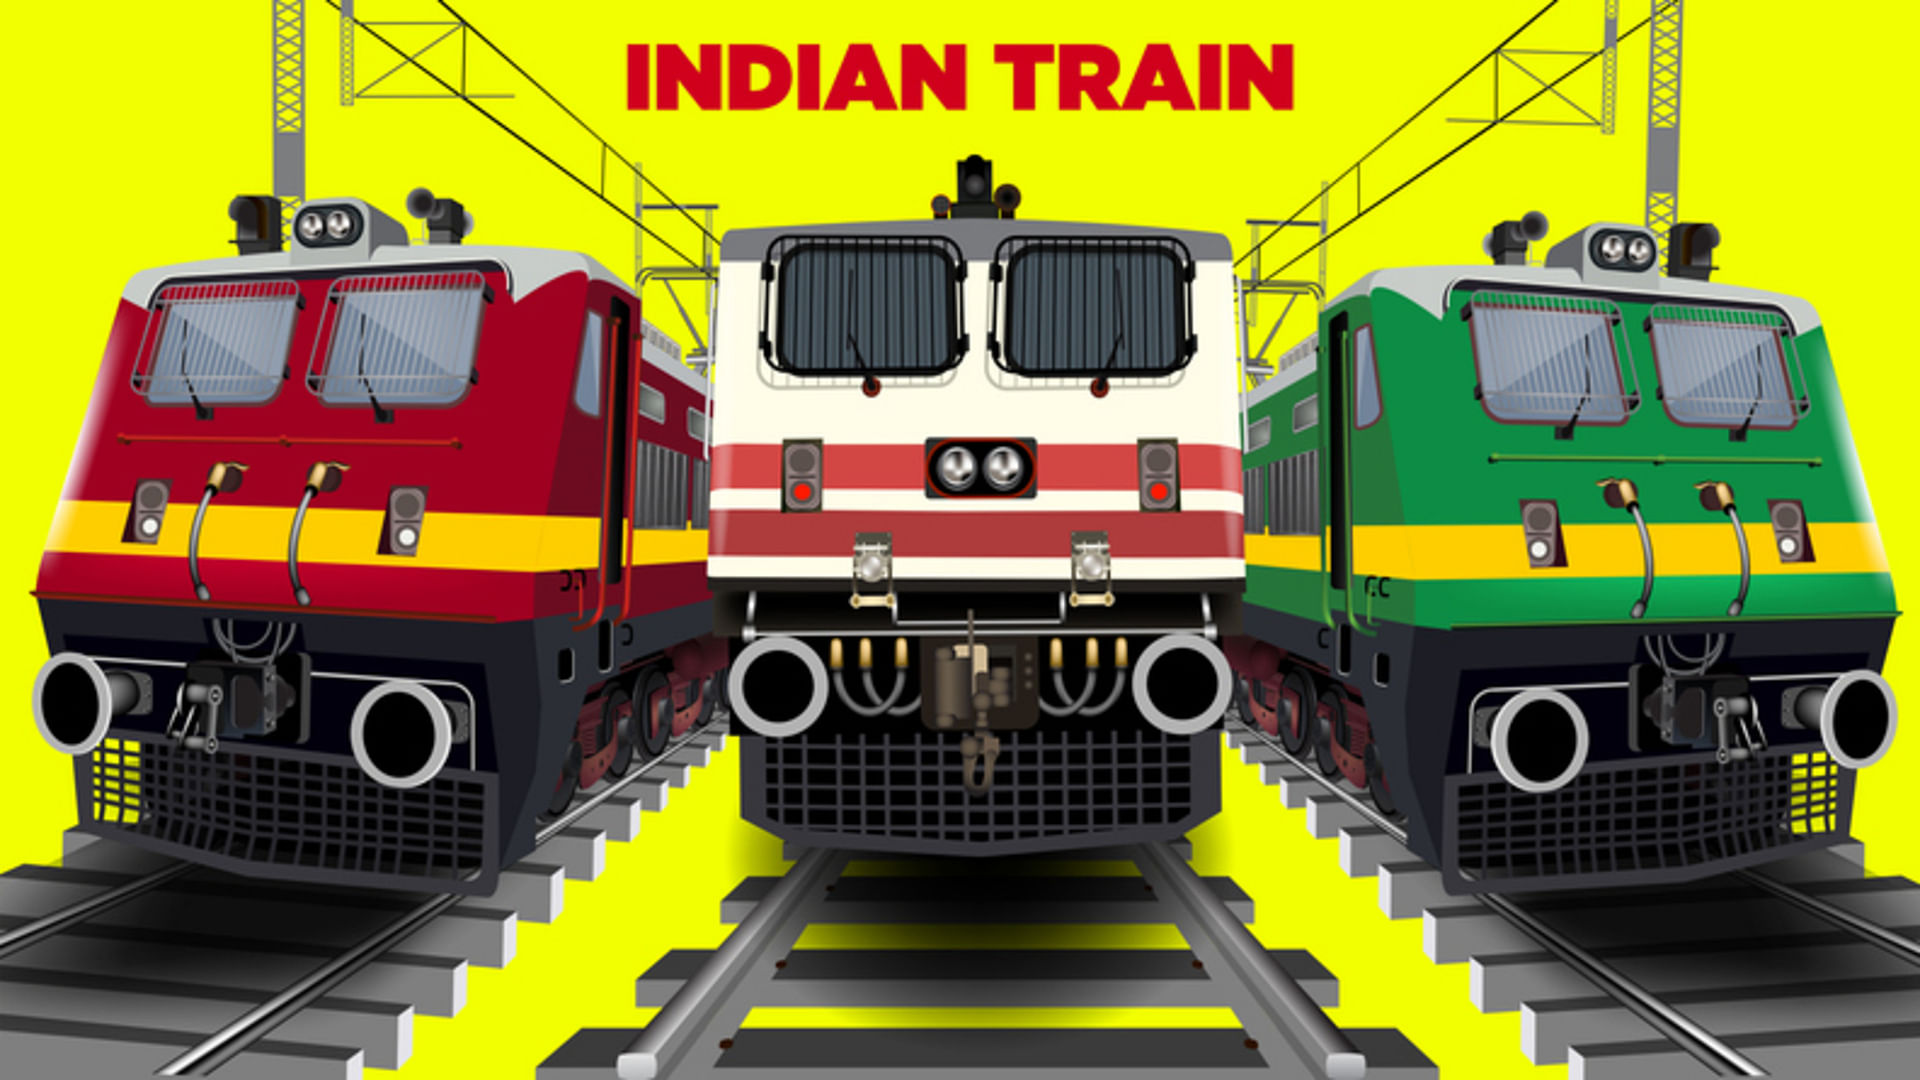 Indian Train Travel Survival Guide